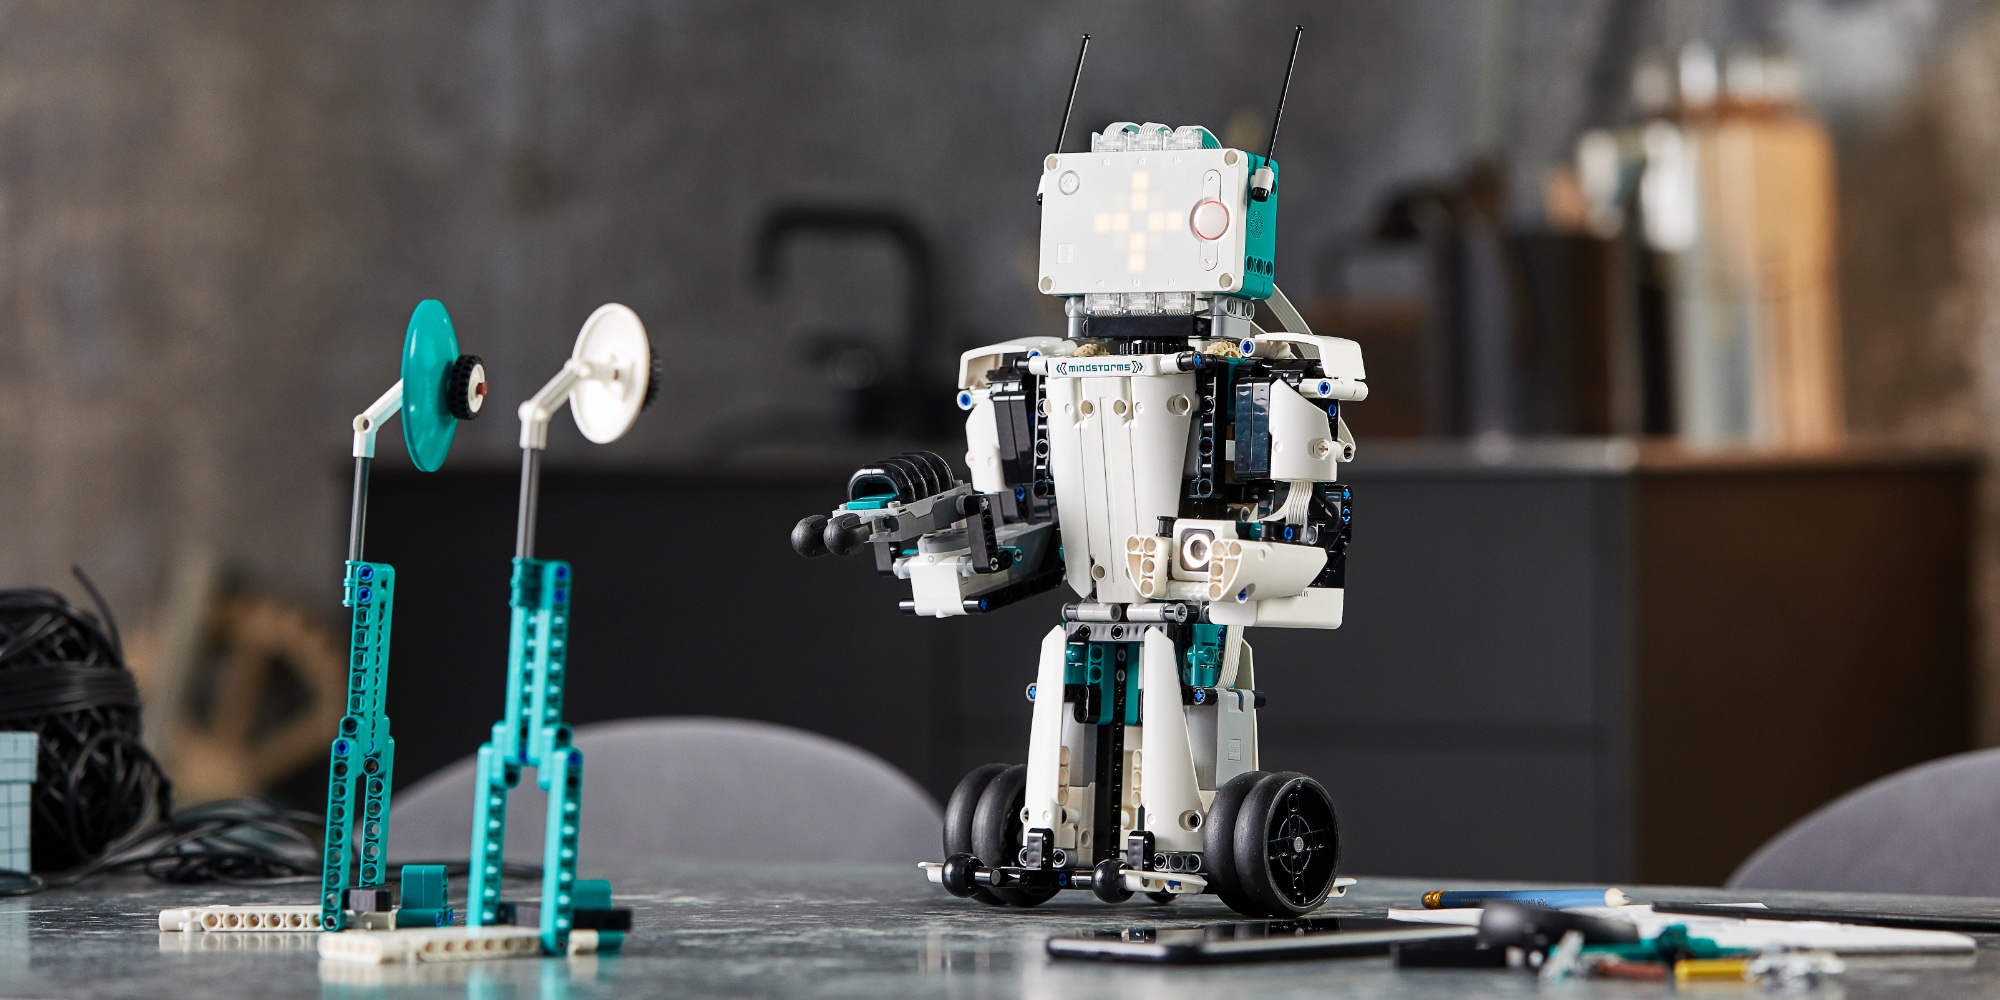 lego 5 in 1 robot